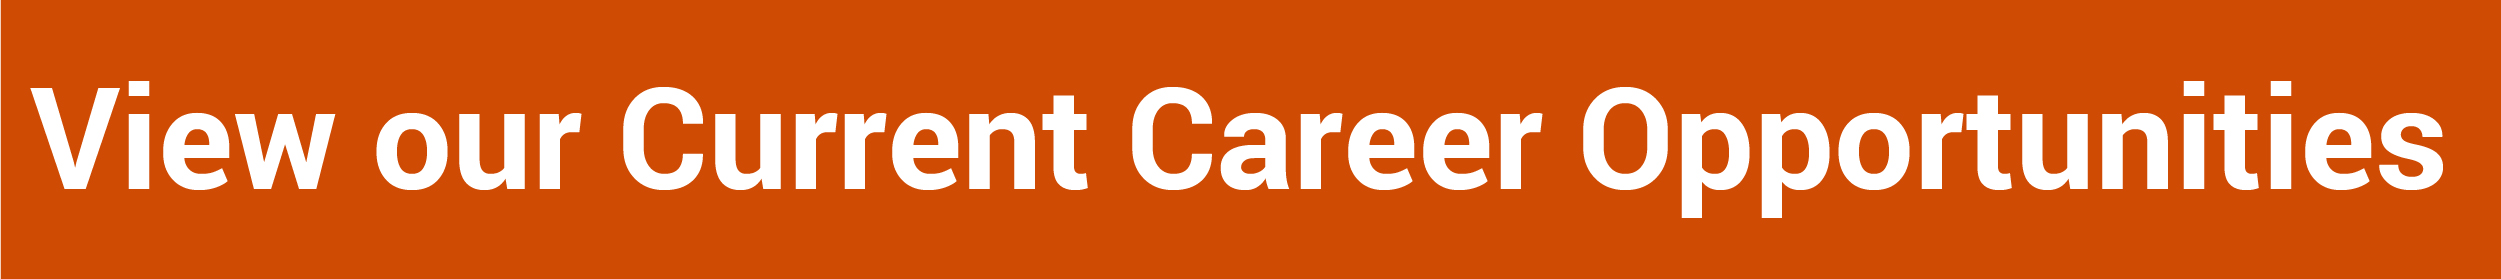 View our current career opportunities button and link to jobs